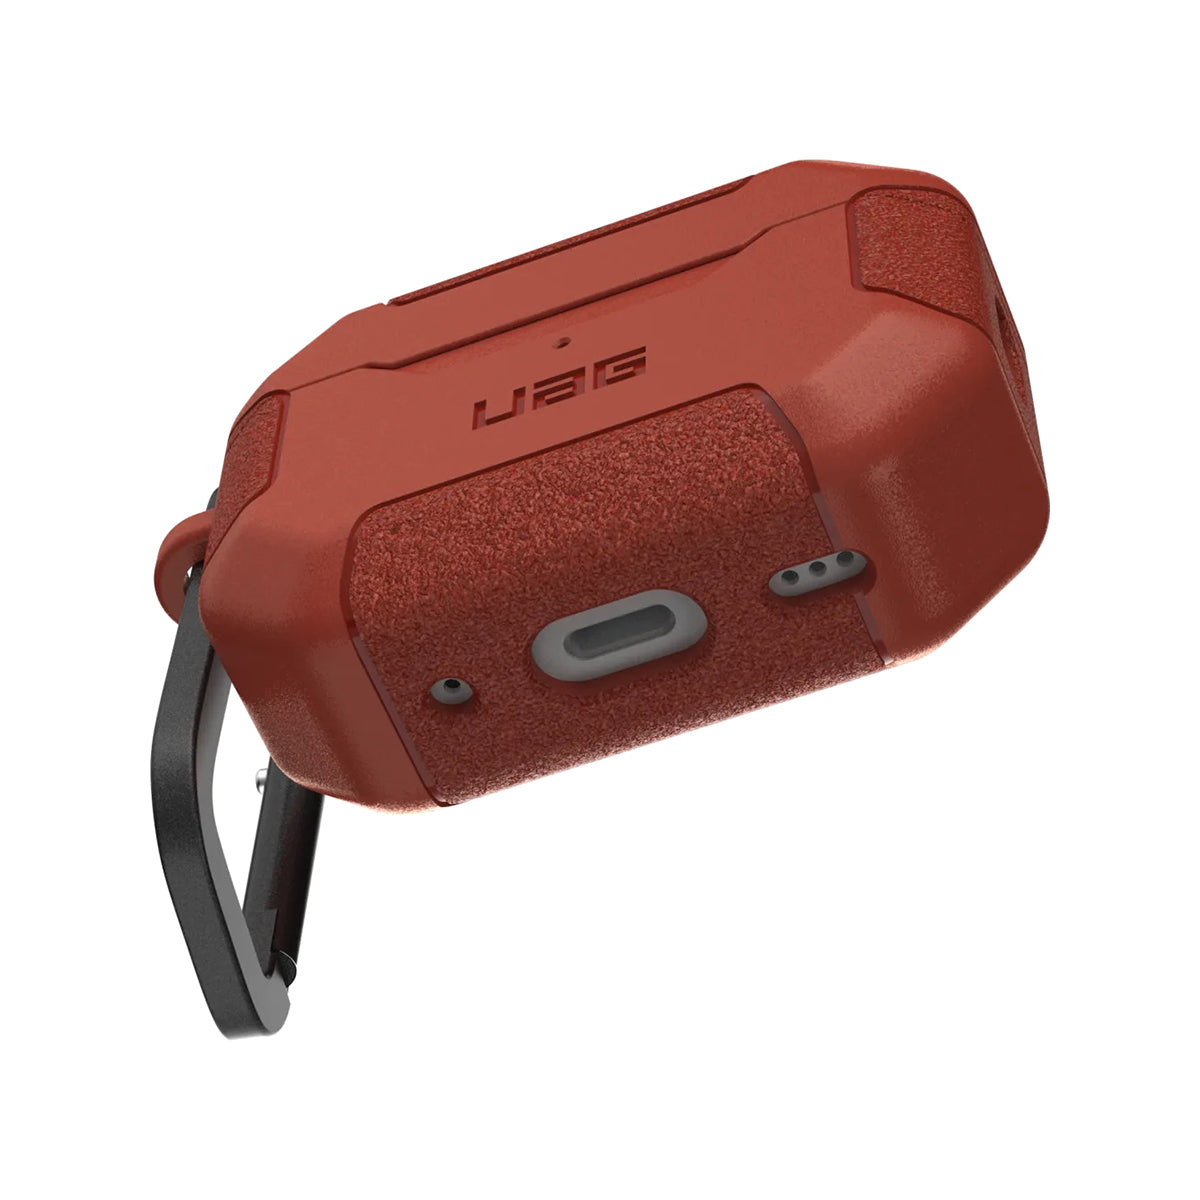 UAG Scout Case For AirPods Pro Gen 2 - Rust